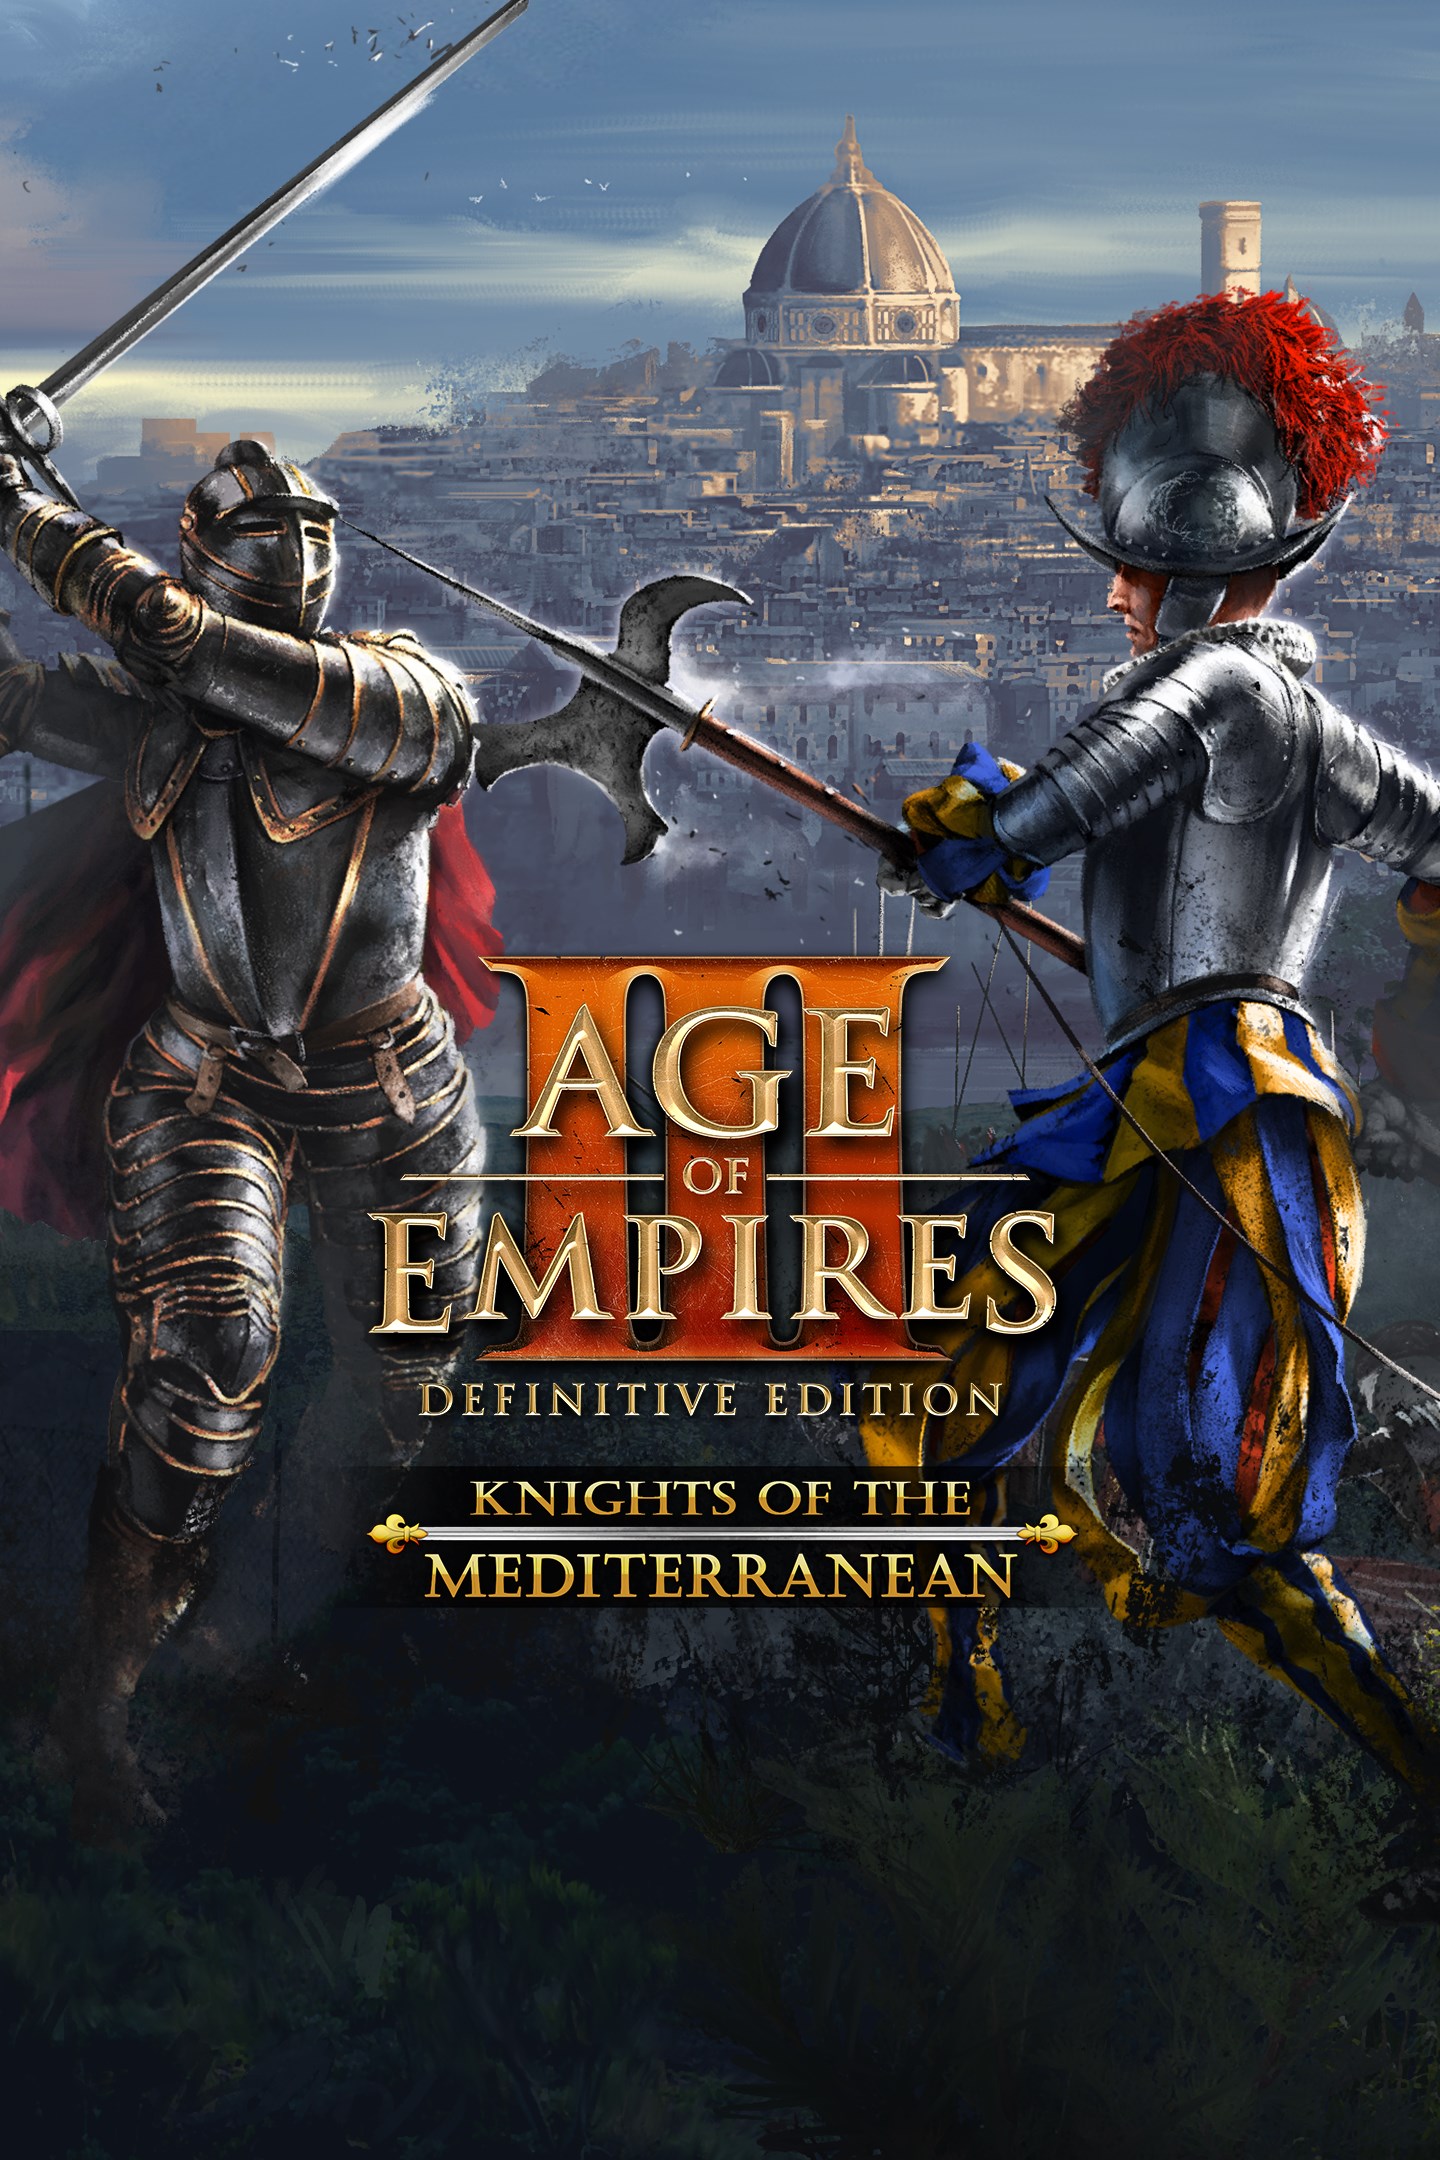 Картинка Age of Empires 3 Definitive Edition – Knights of the Mediterranean